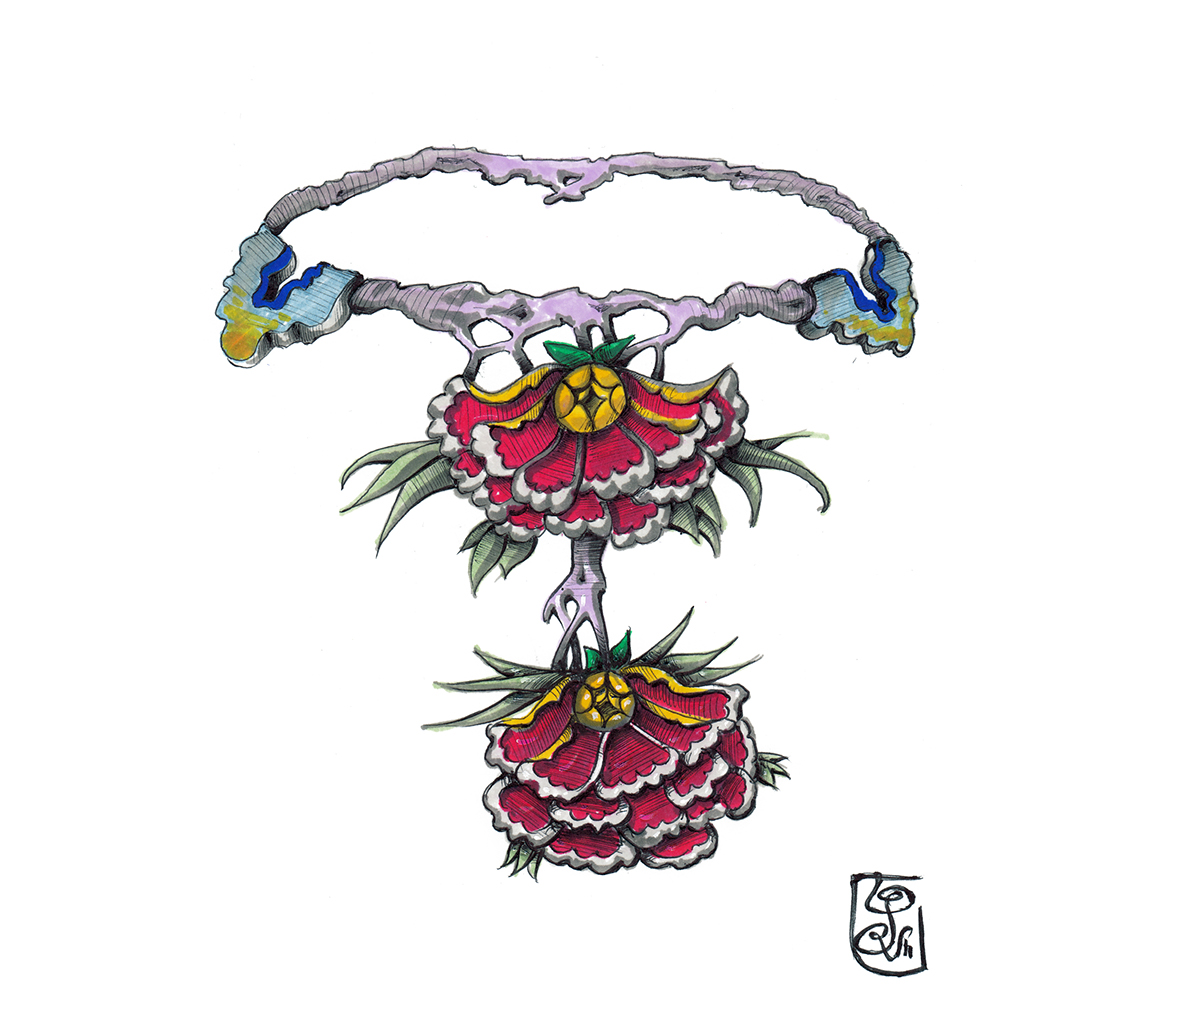 Colored Fantasy Necklace Drawing on Behance